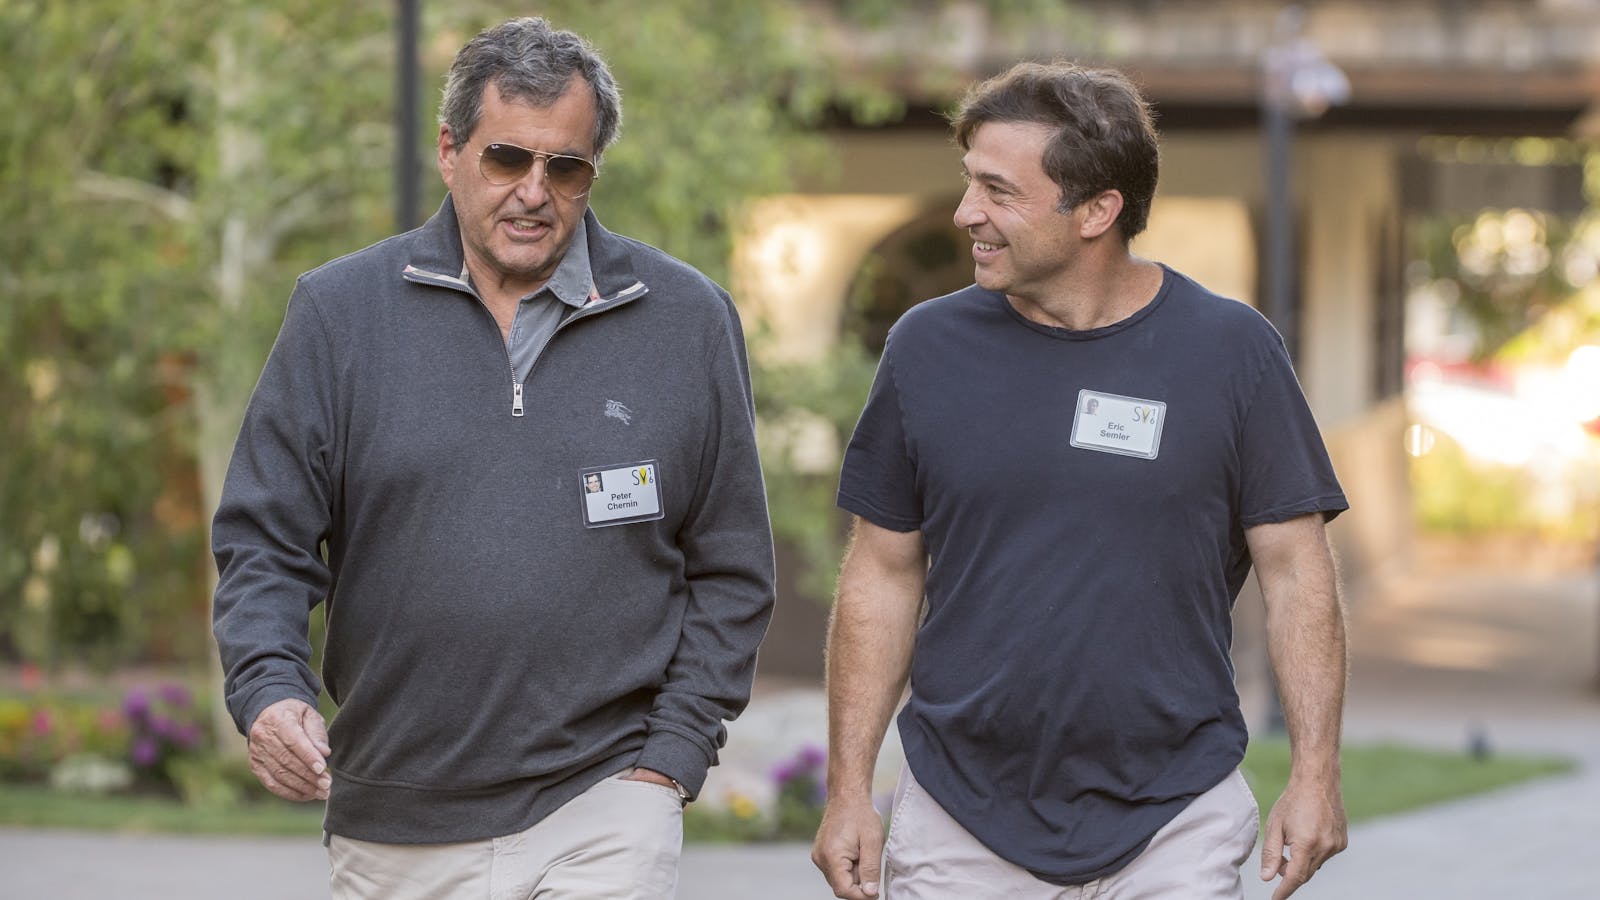 Peter Chernin, left, with investor Eric Semler at the Allen & Co Sun Valley conference in 2016. Photo by Bloomberg